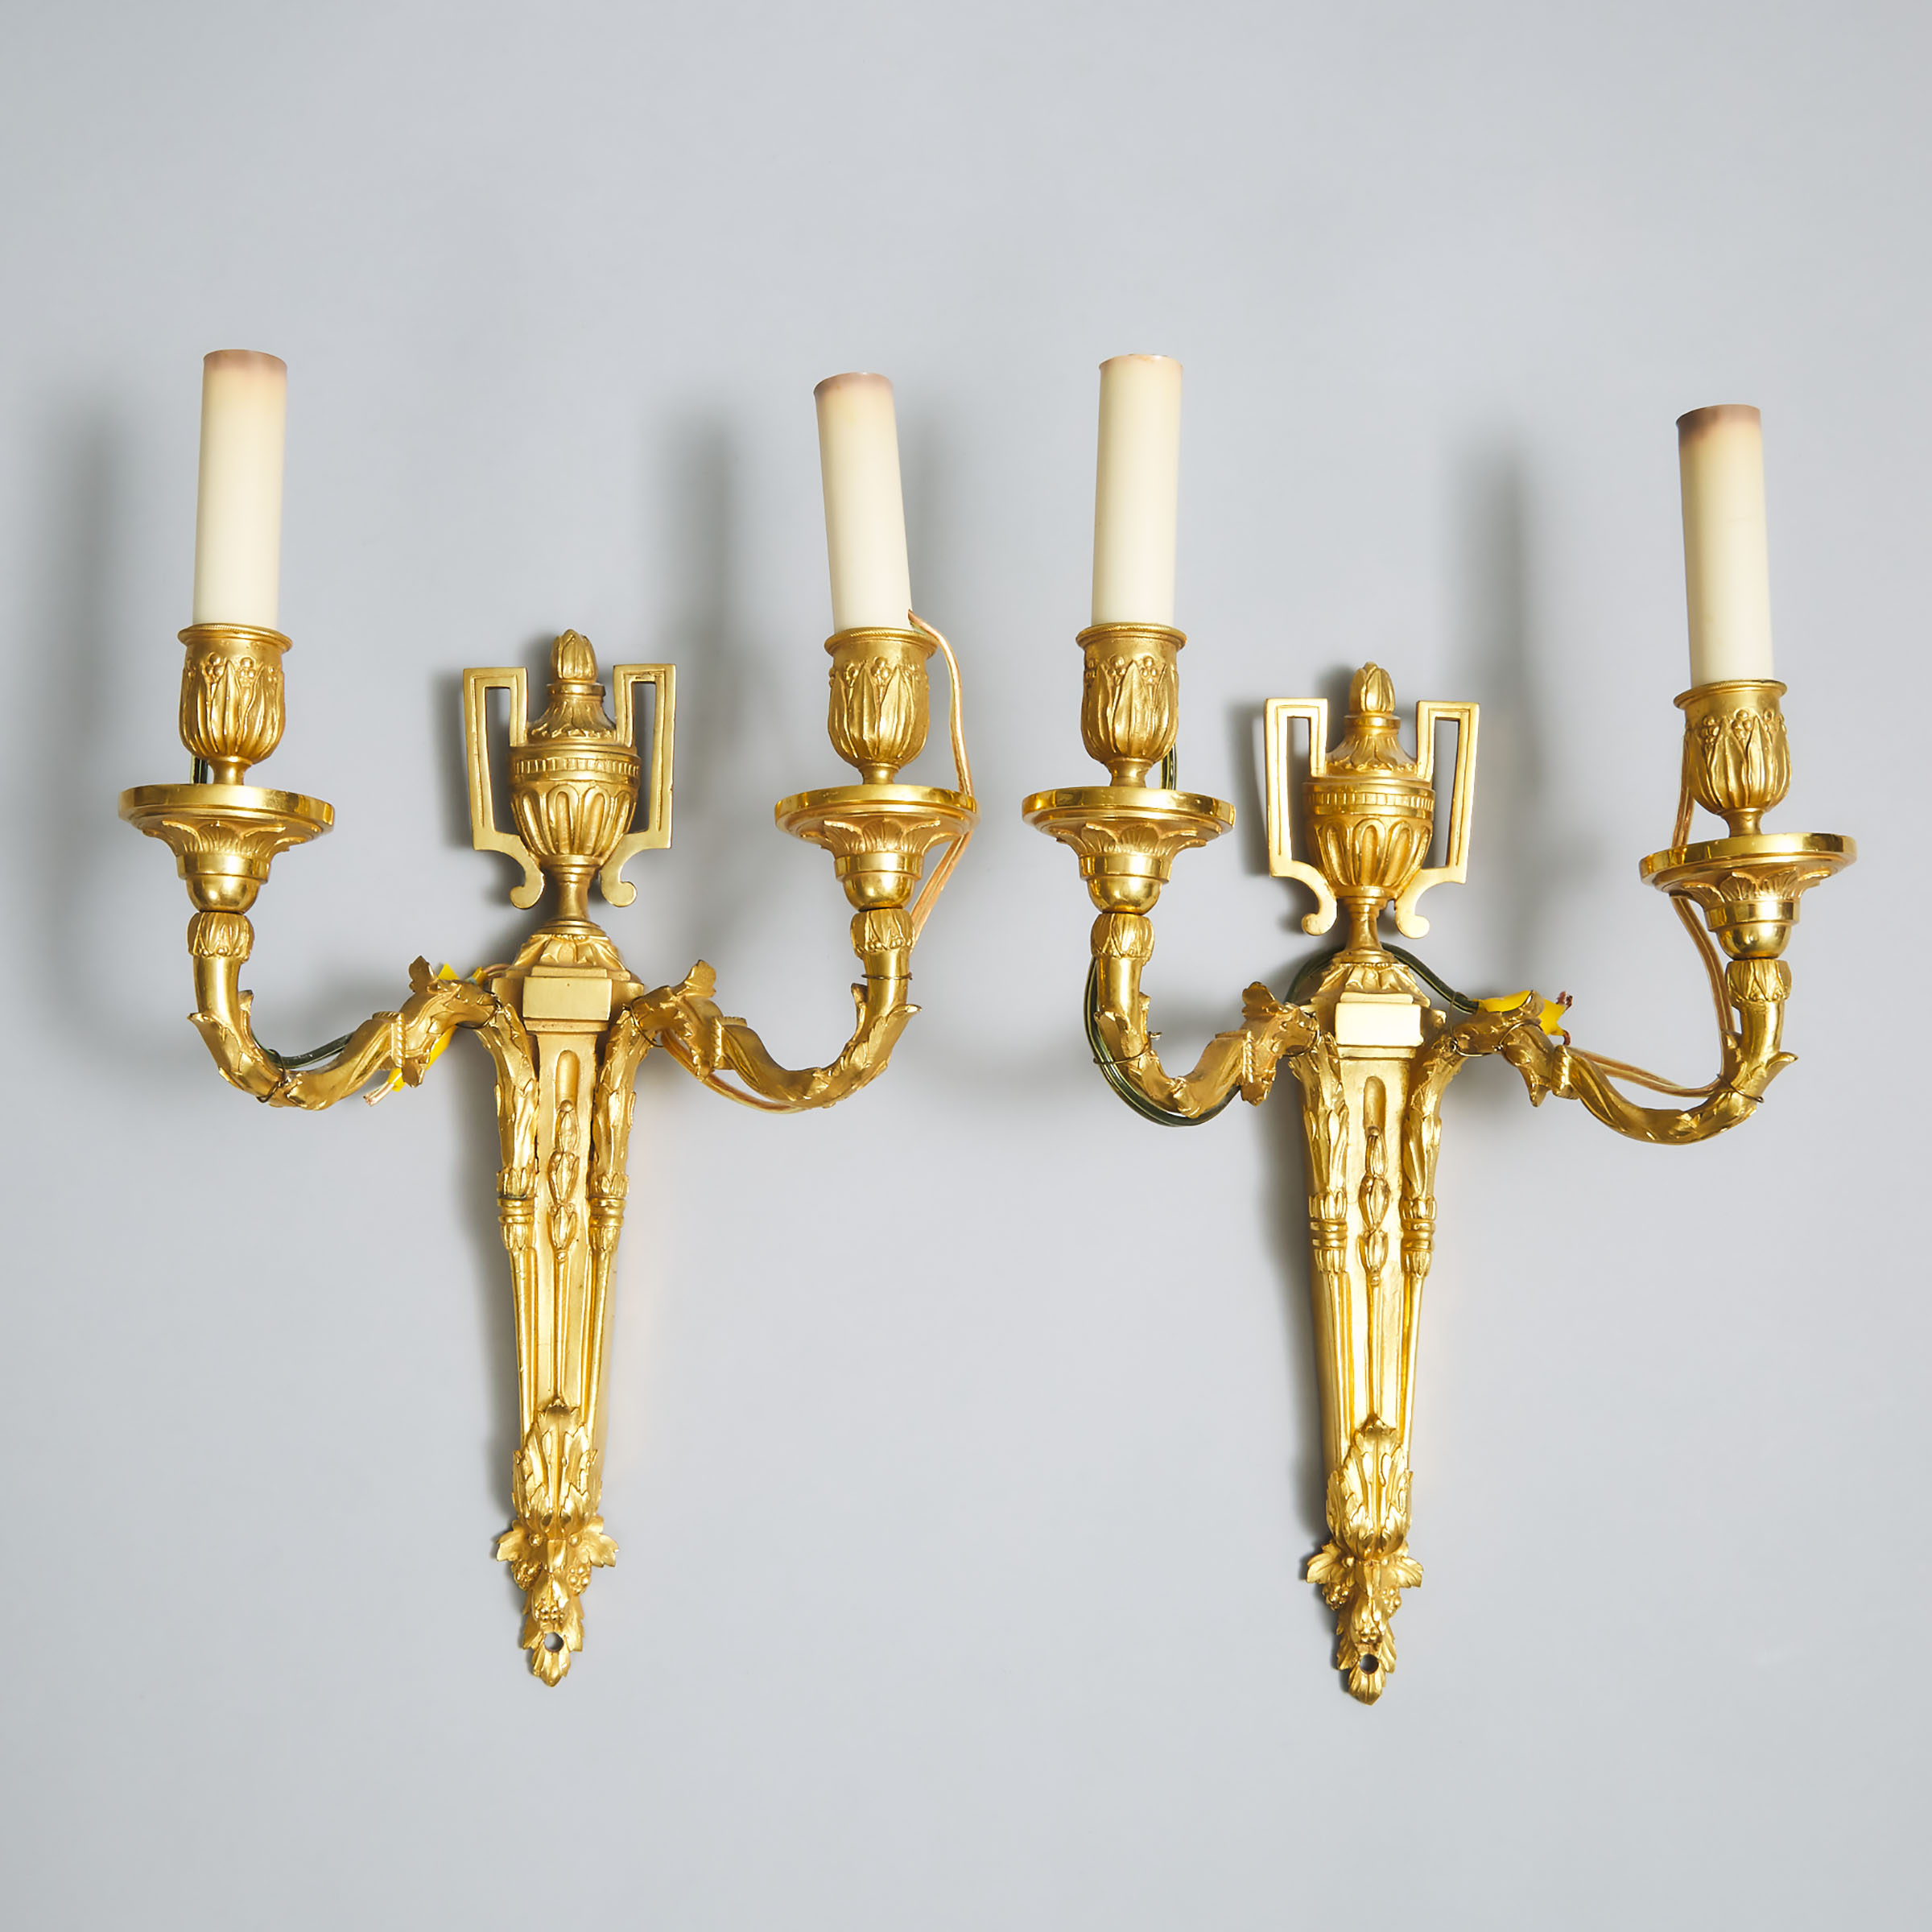 Pair of French Neoclassical Gilt Bronze Two Candle Wall Sconces, 20th century